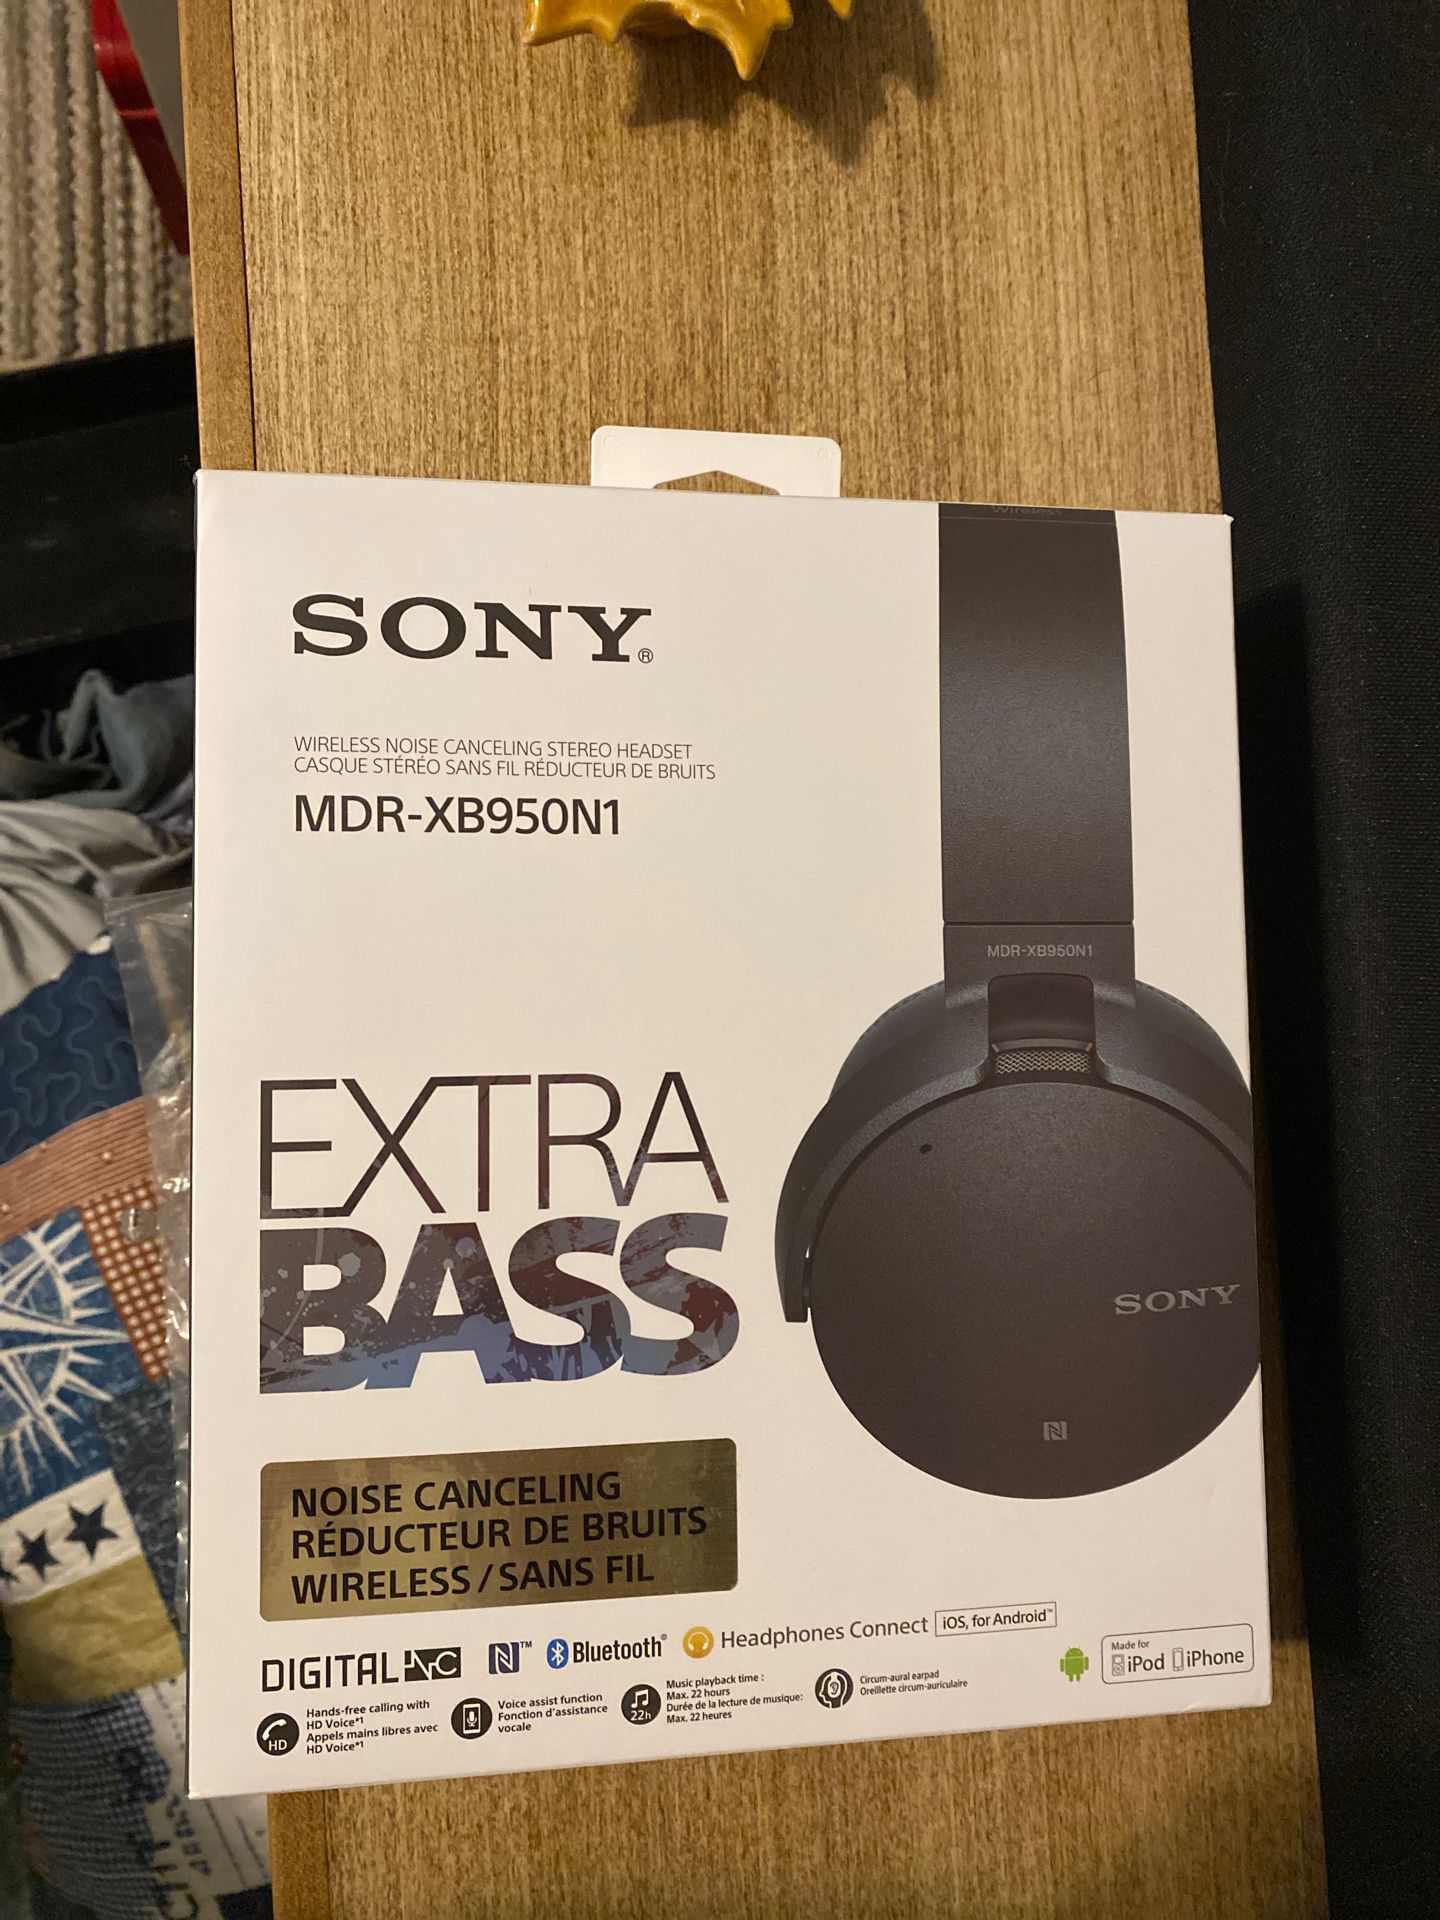 Sony MDR-XB95N1 Extra Bass noise canceling headphones